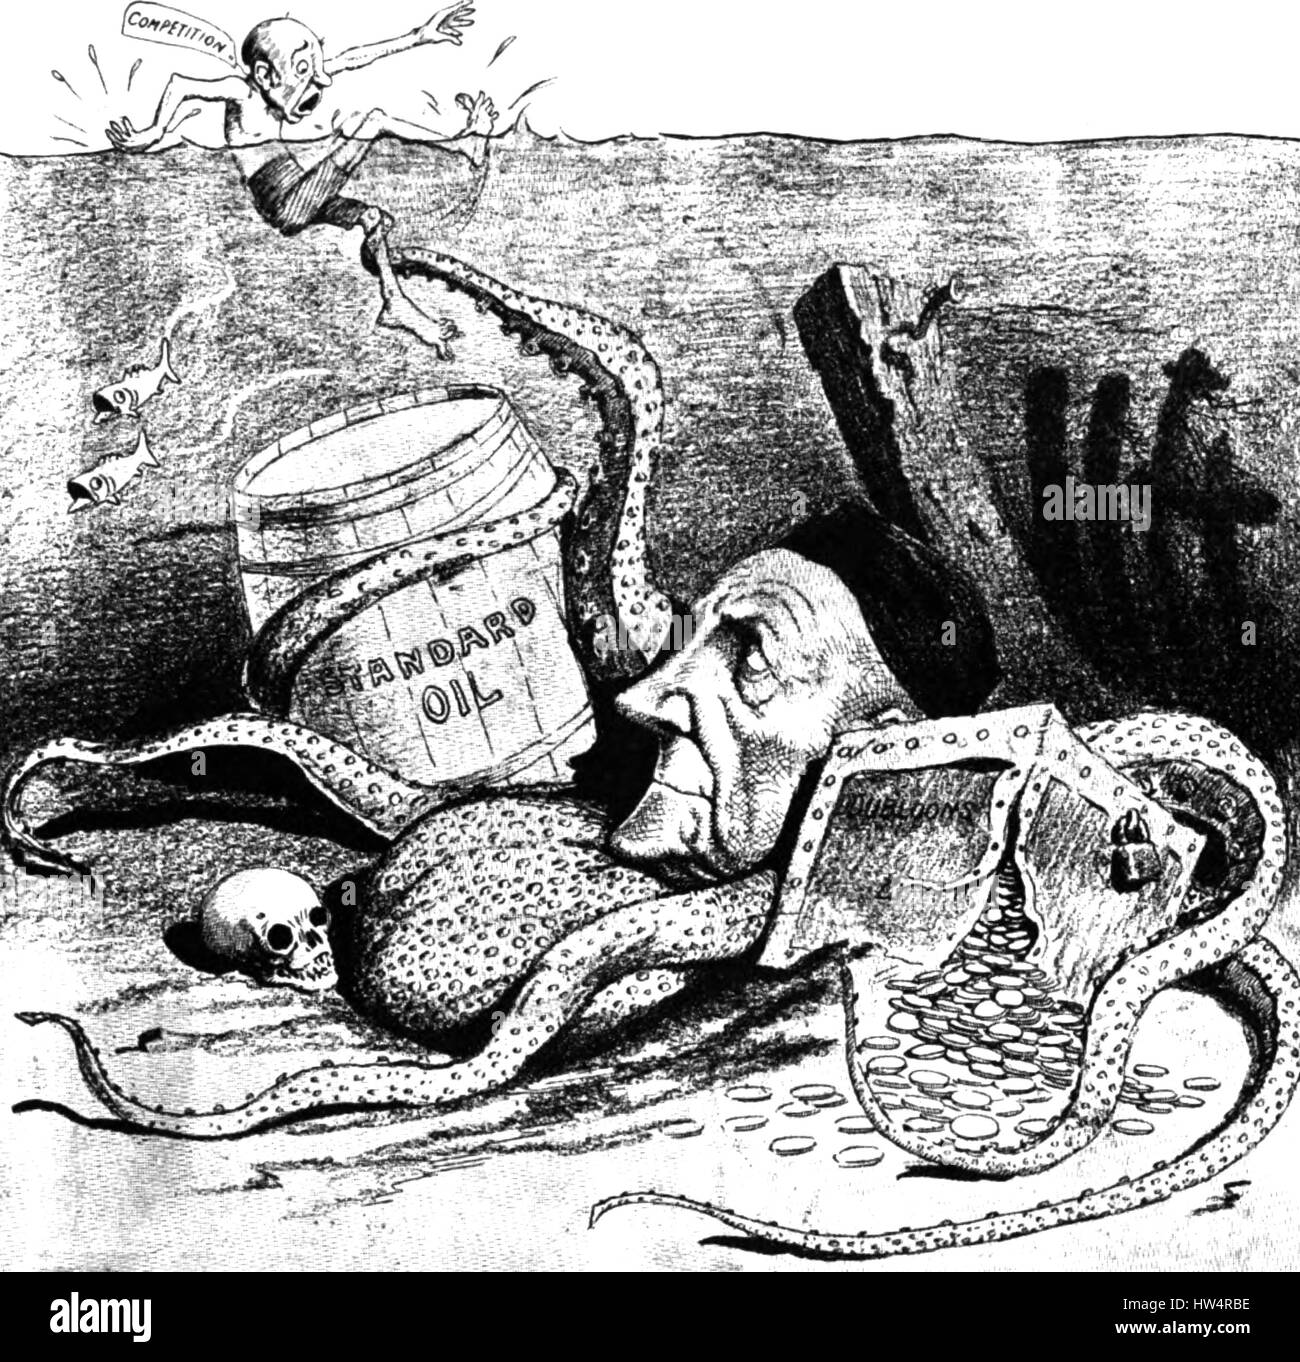 STANDARD OIL COMPANY satirised in a 1906 issue of the American Arena magazine. Comparing the company to an octopus was commonplace in cartoons. Stock Photo